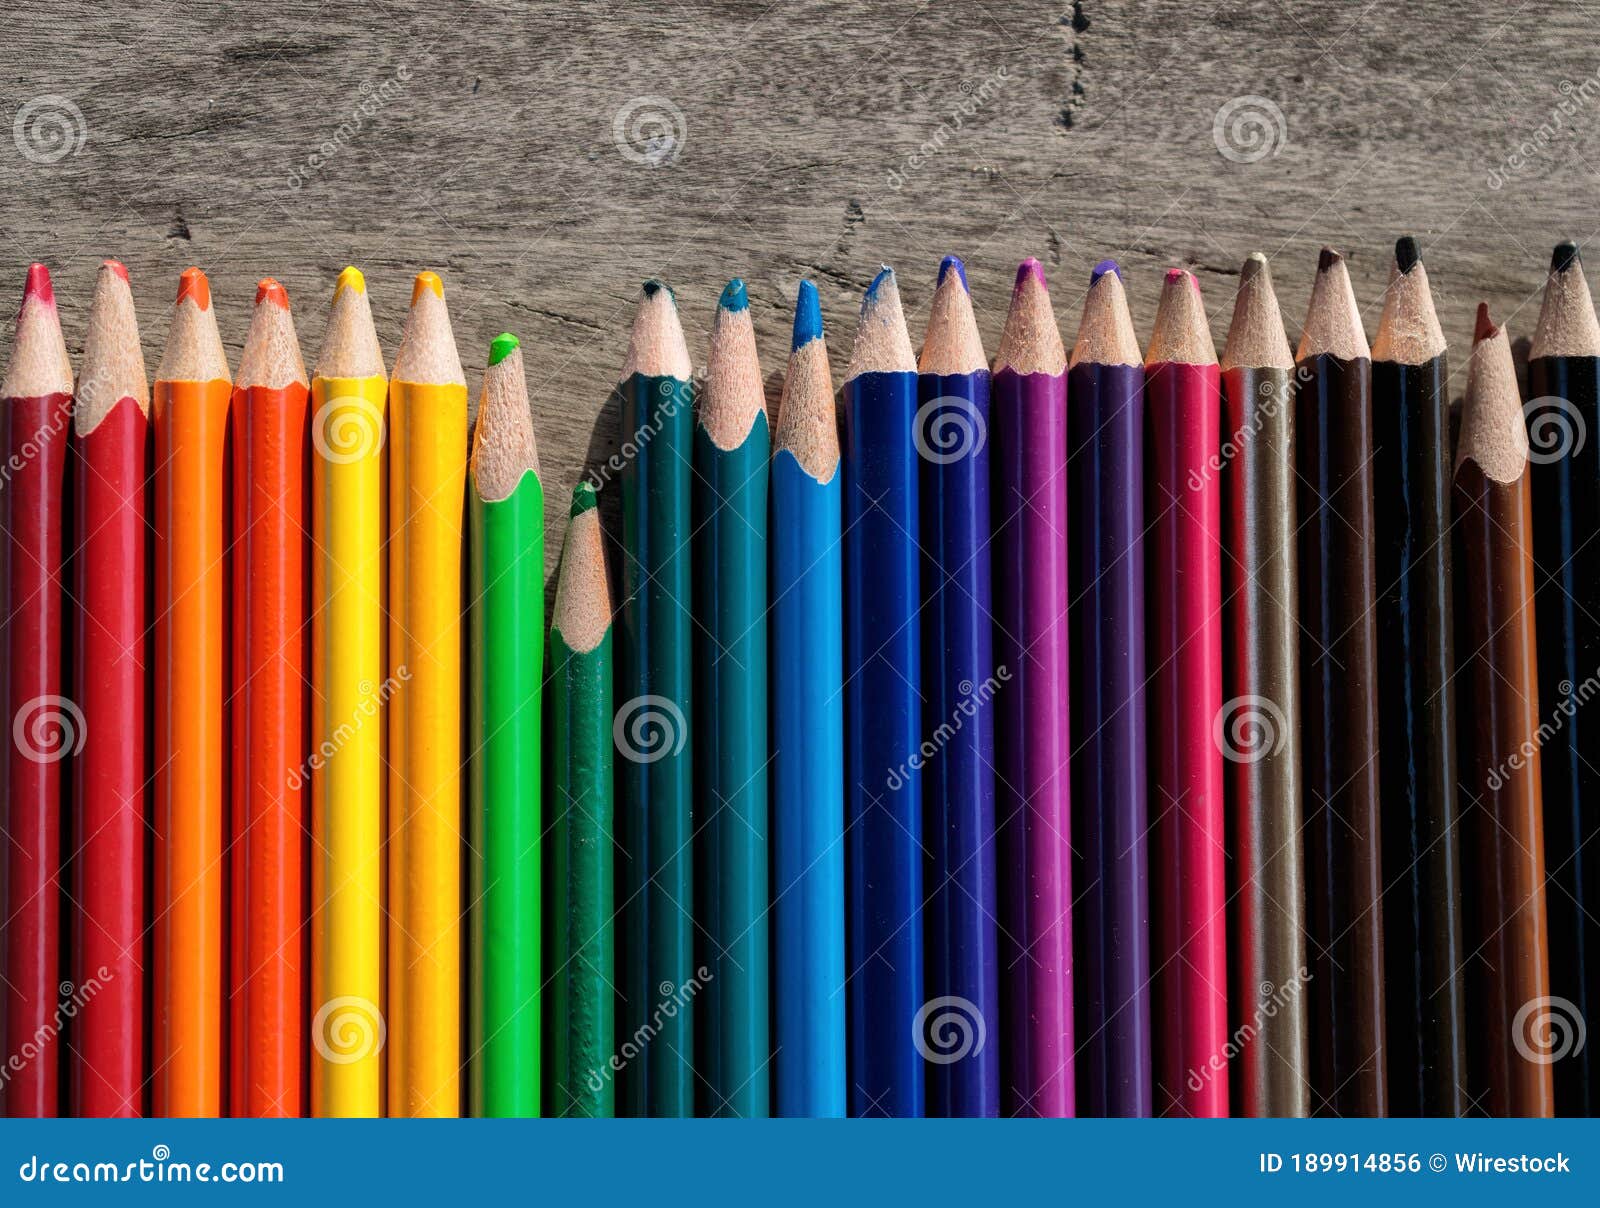 Closeup Shot of Colorful Pencils in a Shade Sequence from the Brightest